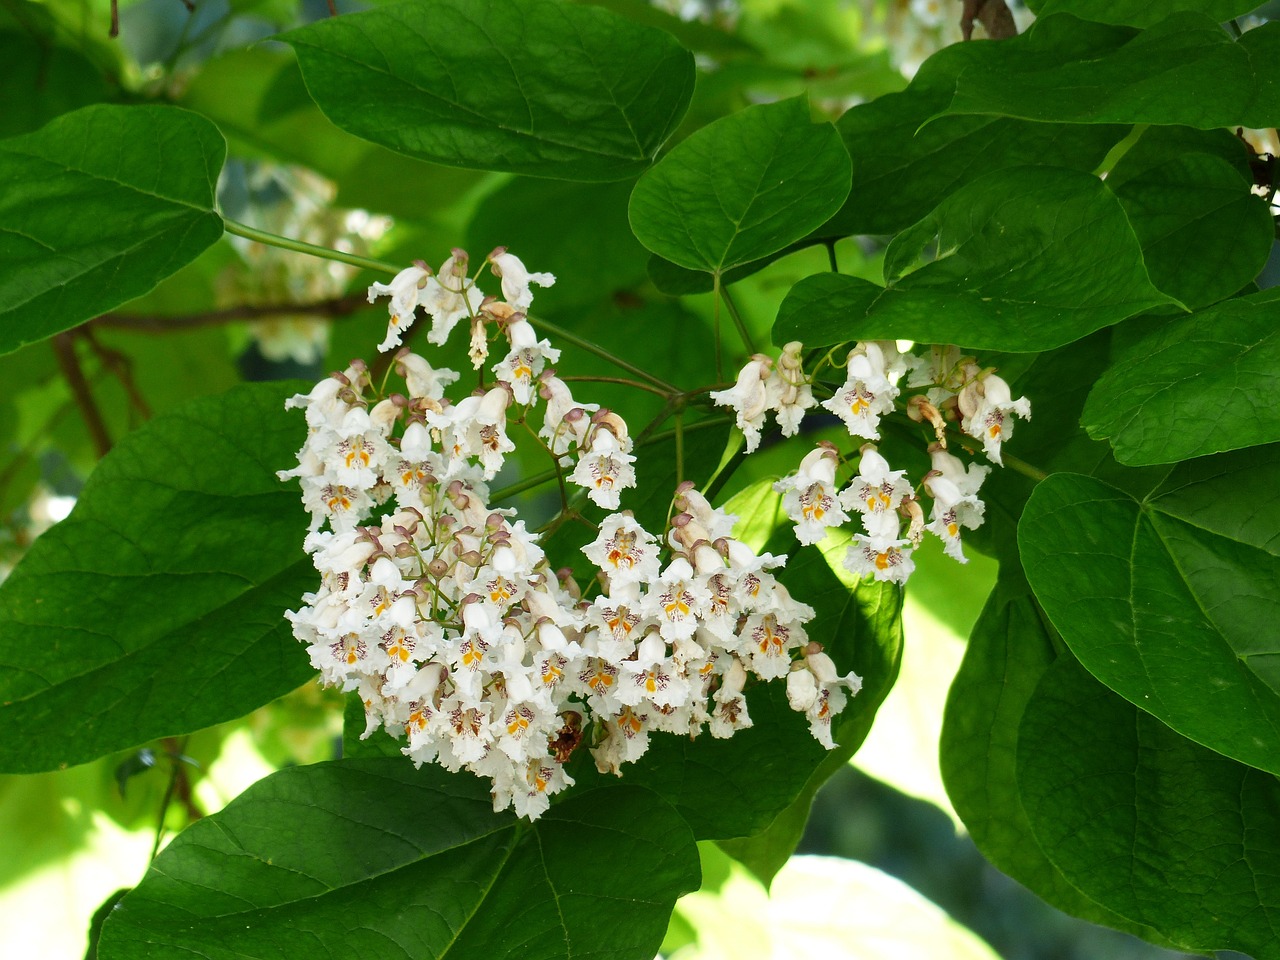 a cluster of white flowers on a tree, hurufiyya, elder, with intricate details, molten, lush garden leaves and flowers